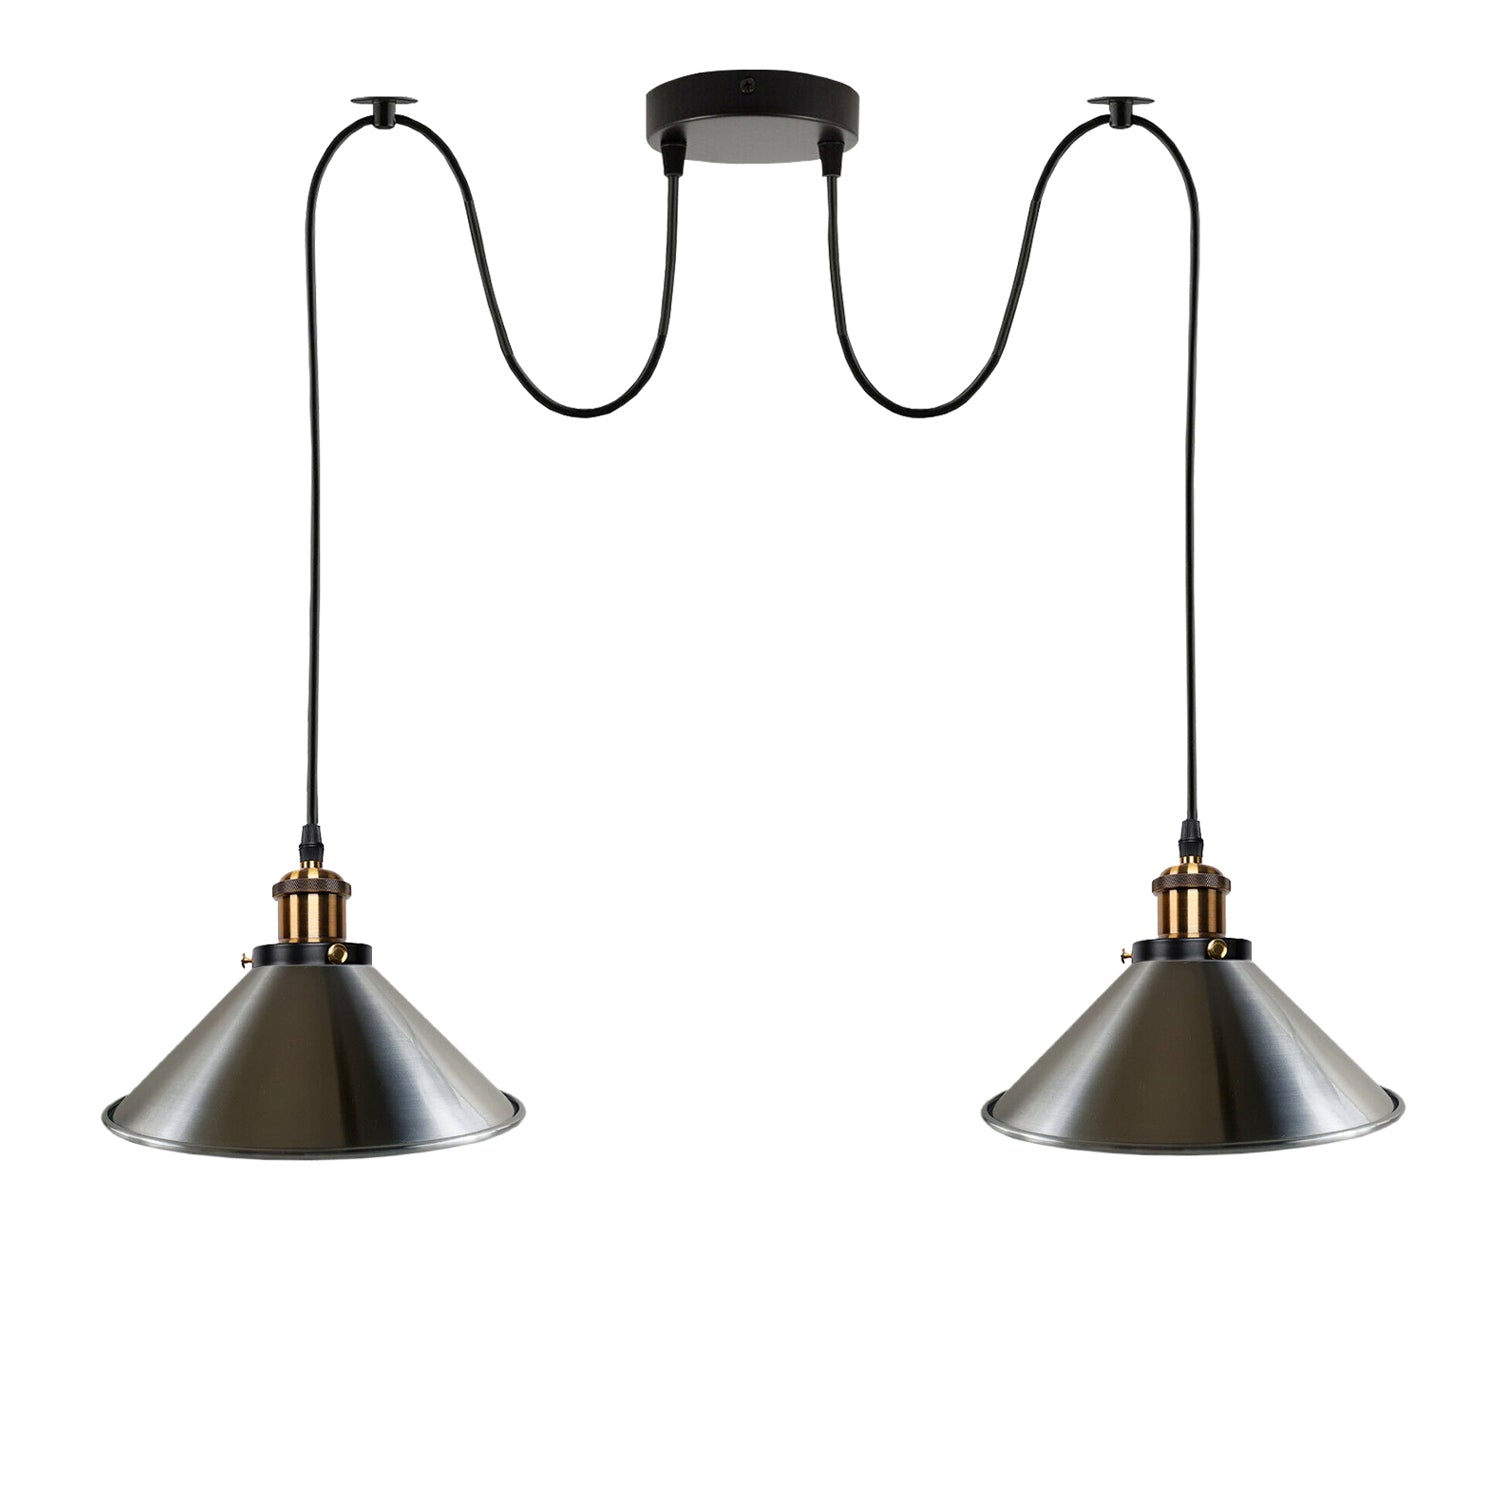 2-Way Retro Industrial Ceiling Cable E27 Hanging Lamp Pendant light~3403 Stain Nickel / Yes